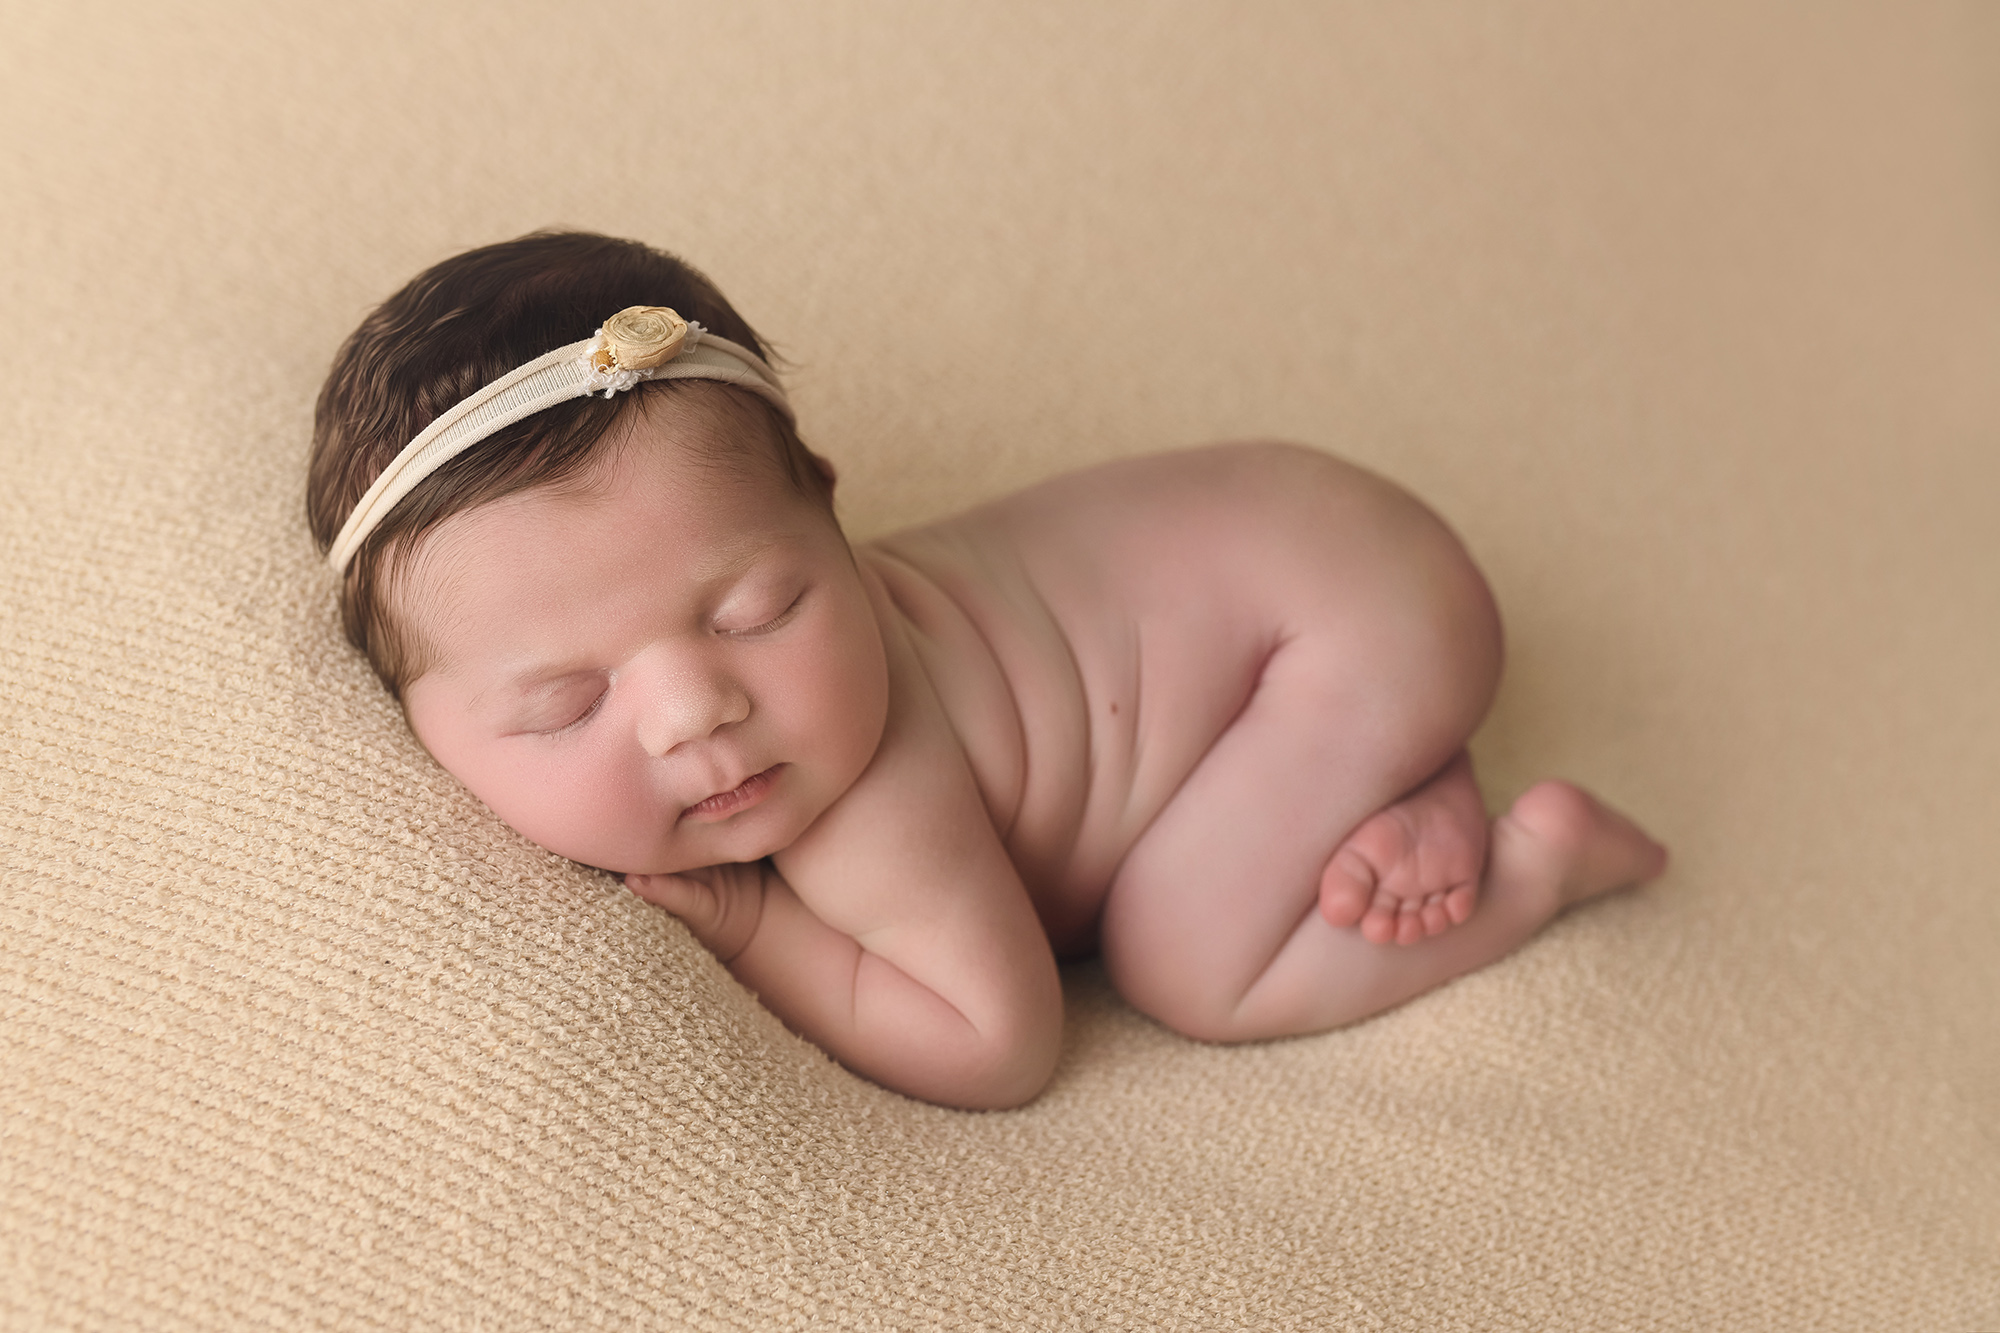 newborn baby girl with cream bow and bum in air